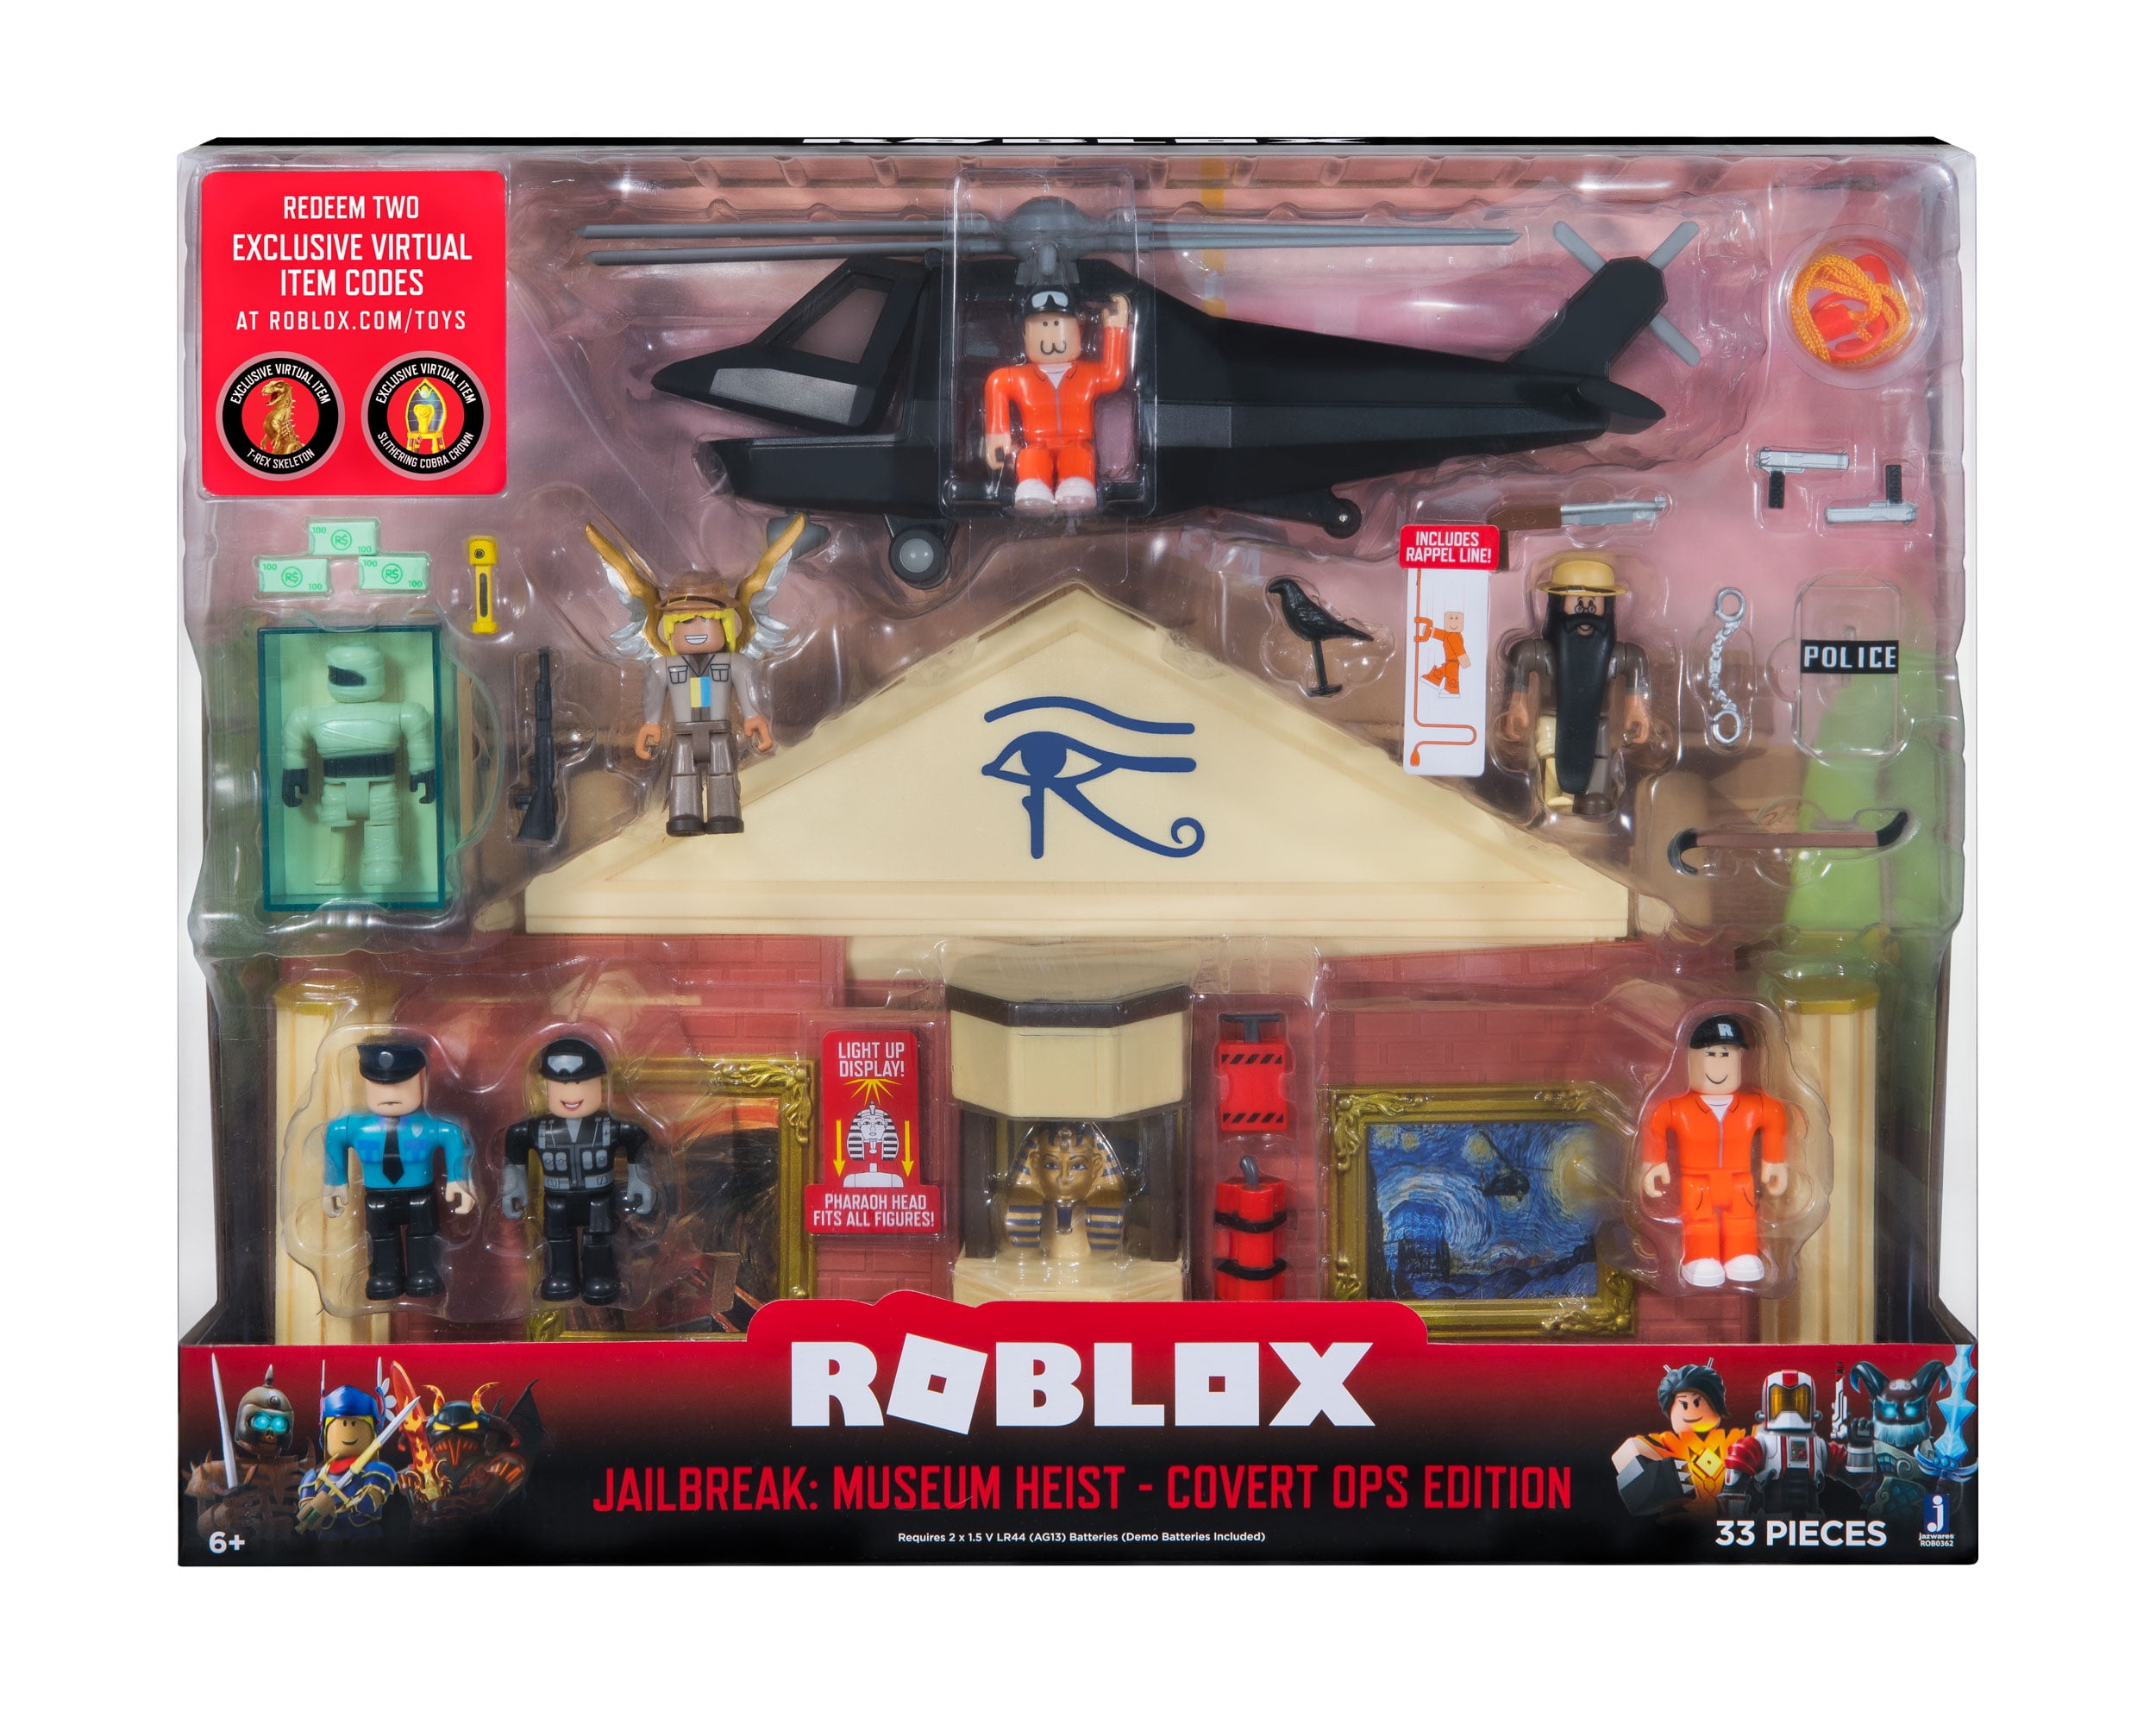 Roblox Action Collection Jailbreak Museum Heist Covert Ops Edition Playset Includes Two Exclusive Virtual Items Walmart Com Walmart Com - roblox museum heist toy walmart